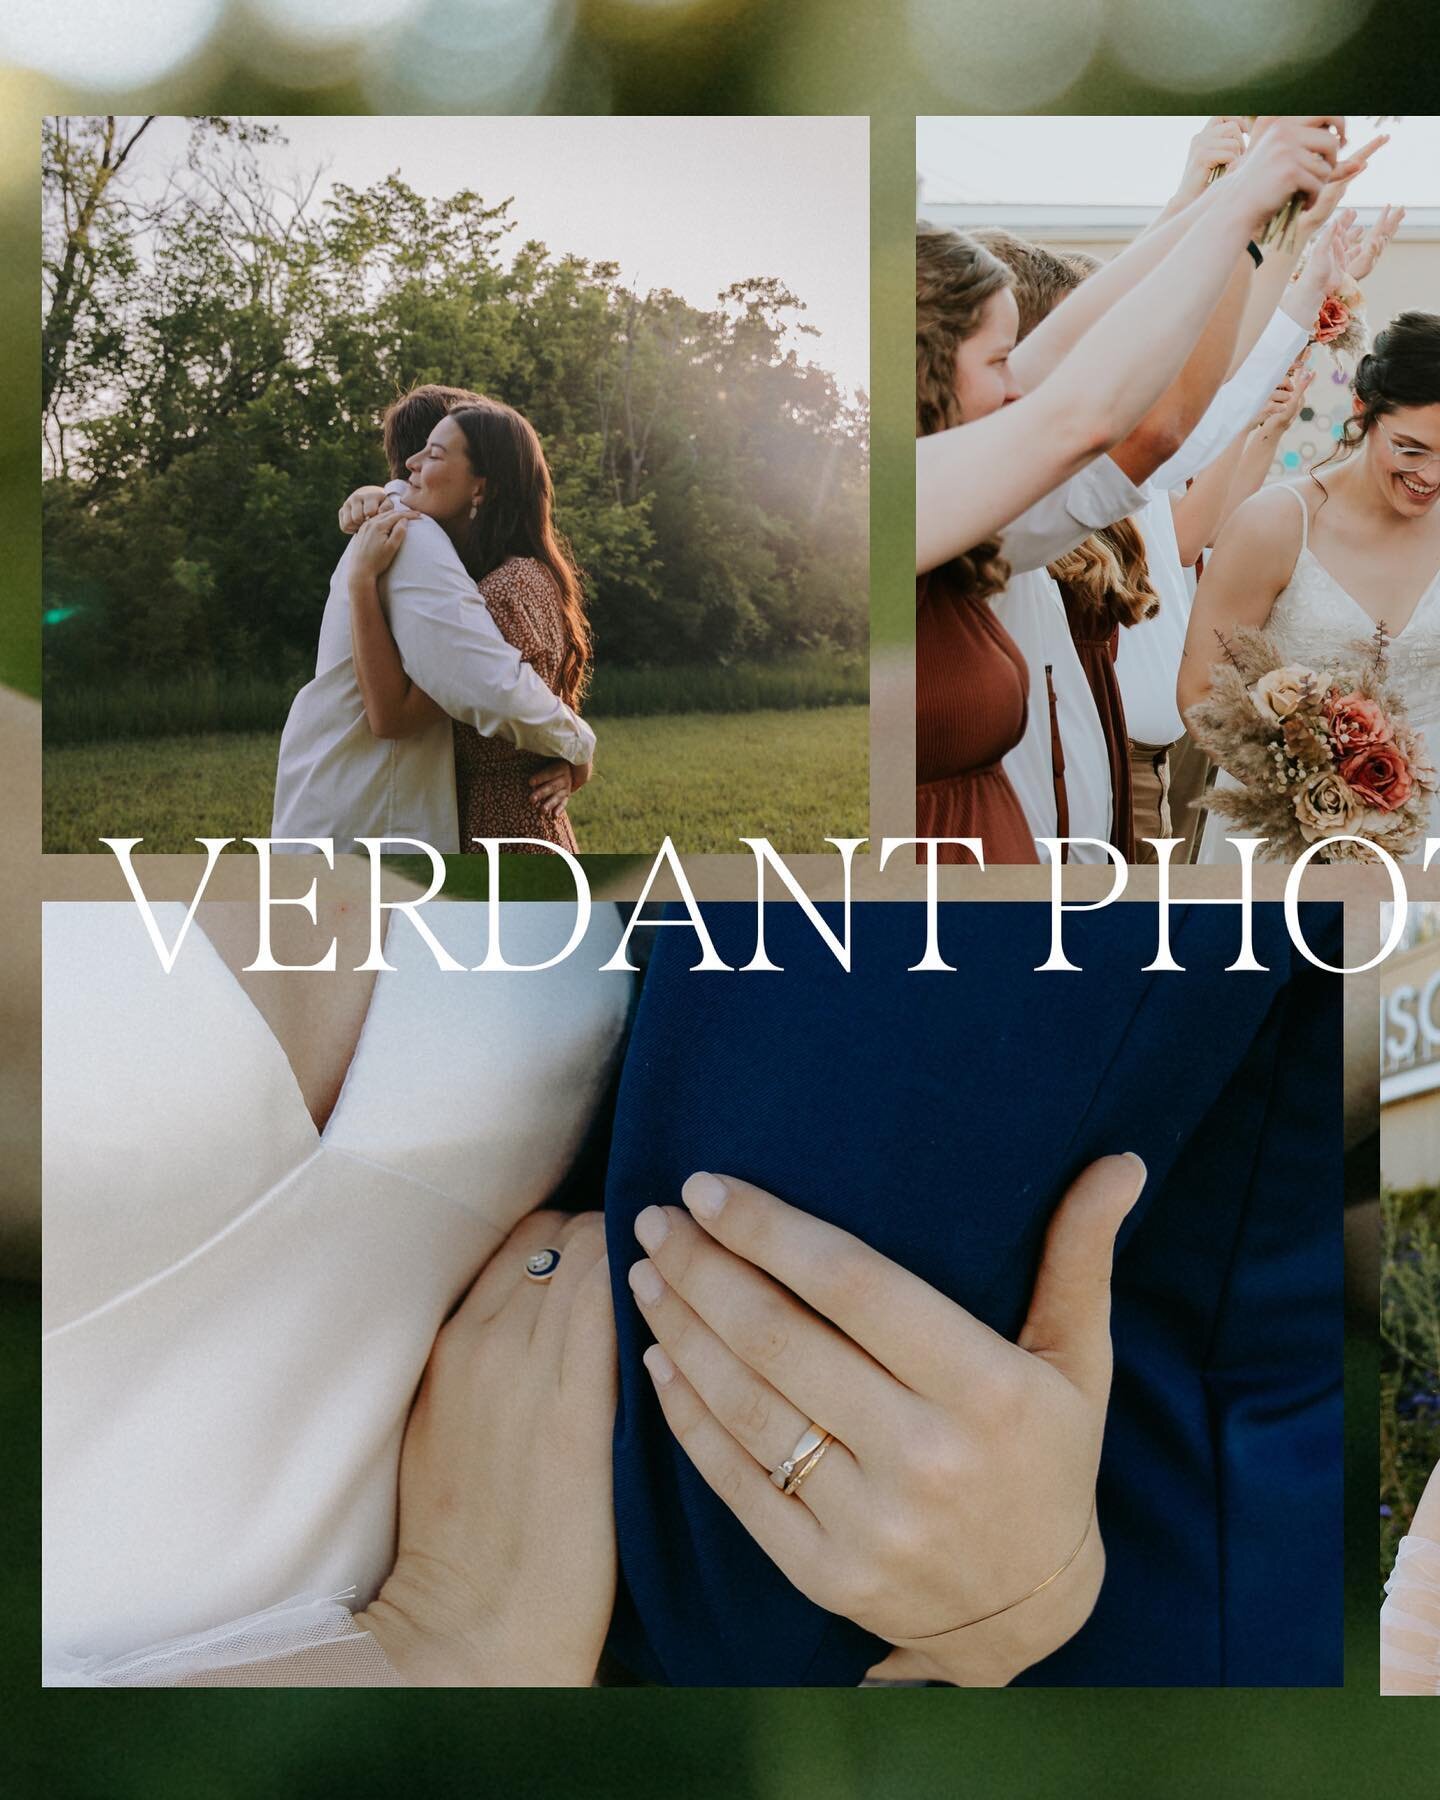 The rebrand is here! 
So thankful for all the love and support from not only my friends and family, but my clients as well. Those who have chosen to allow me to capture their most special moments hold such a special place in my heart. You all have ma